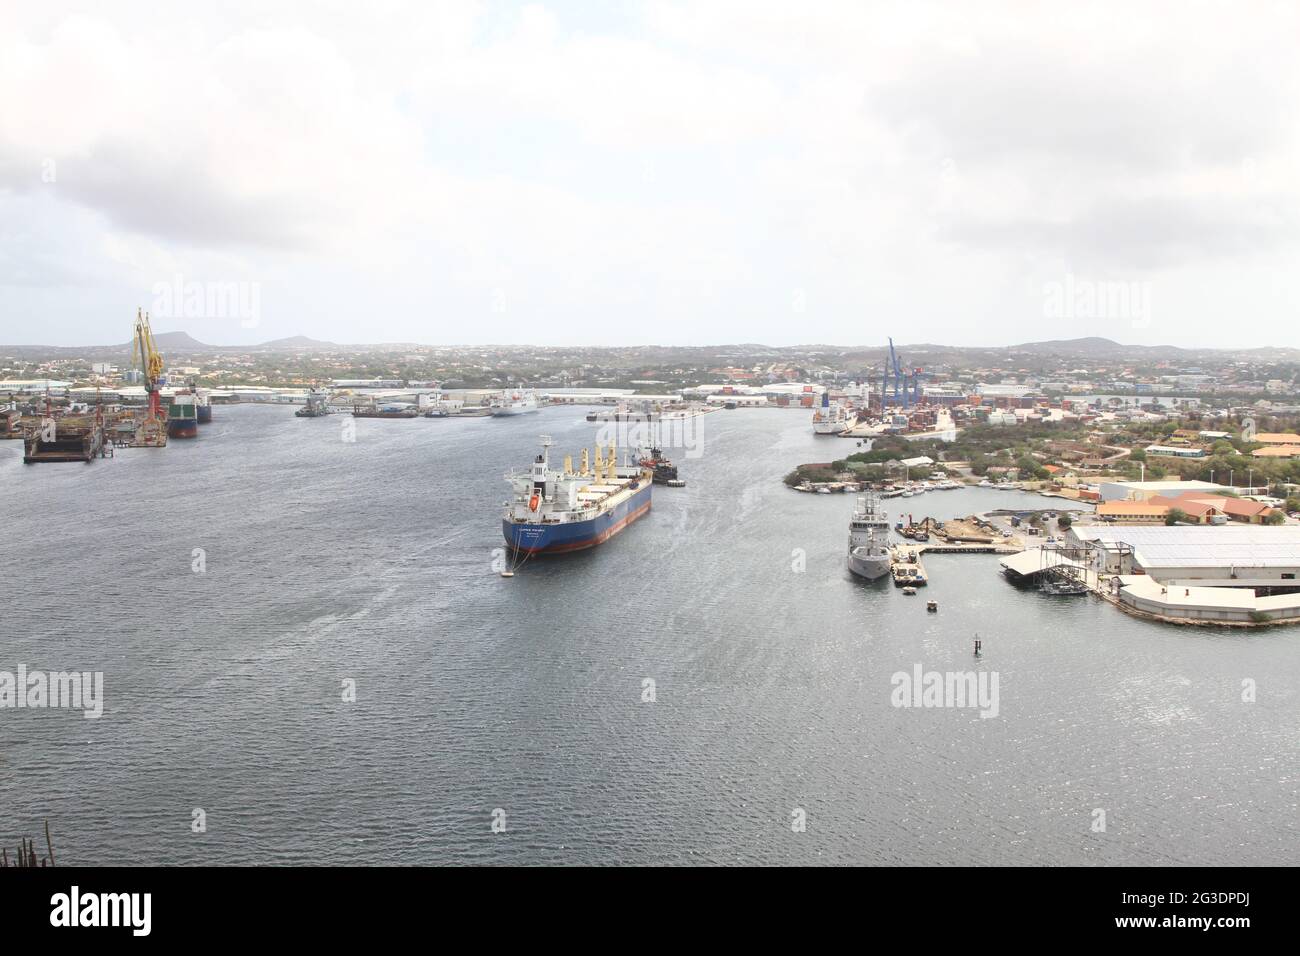 Port and industrial area on the Caribbean Island of Curacao, Dutch Caribbean . Also known as part of the ABC Islands. Cargo shipping traffic. Oil terminal. Willemstad. Stock Photo